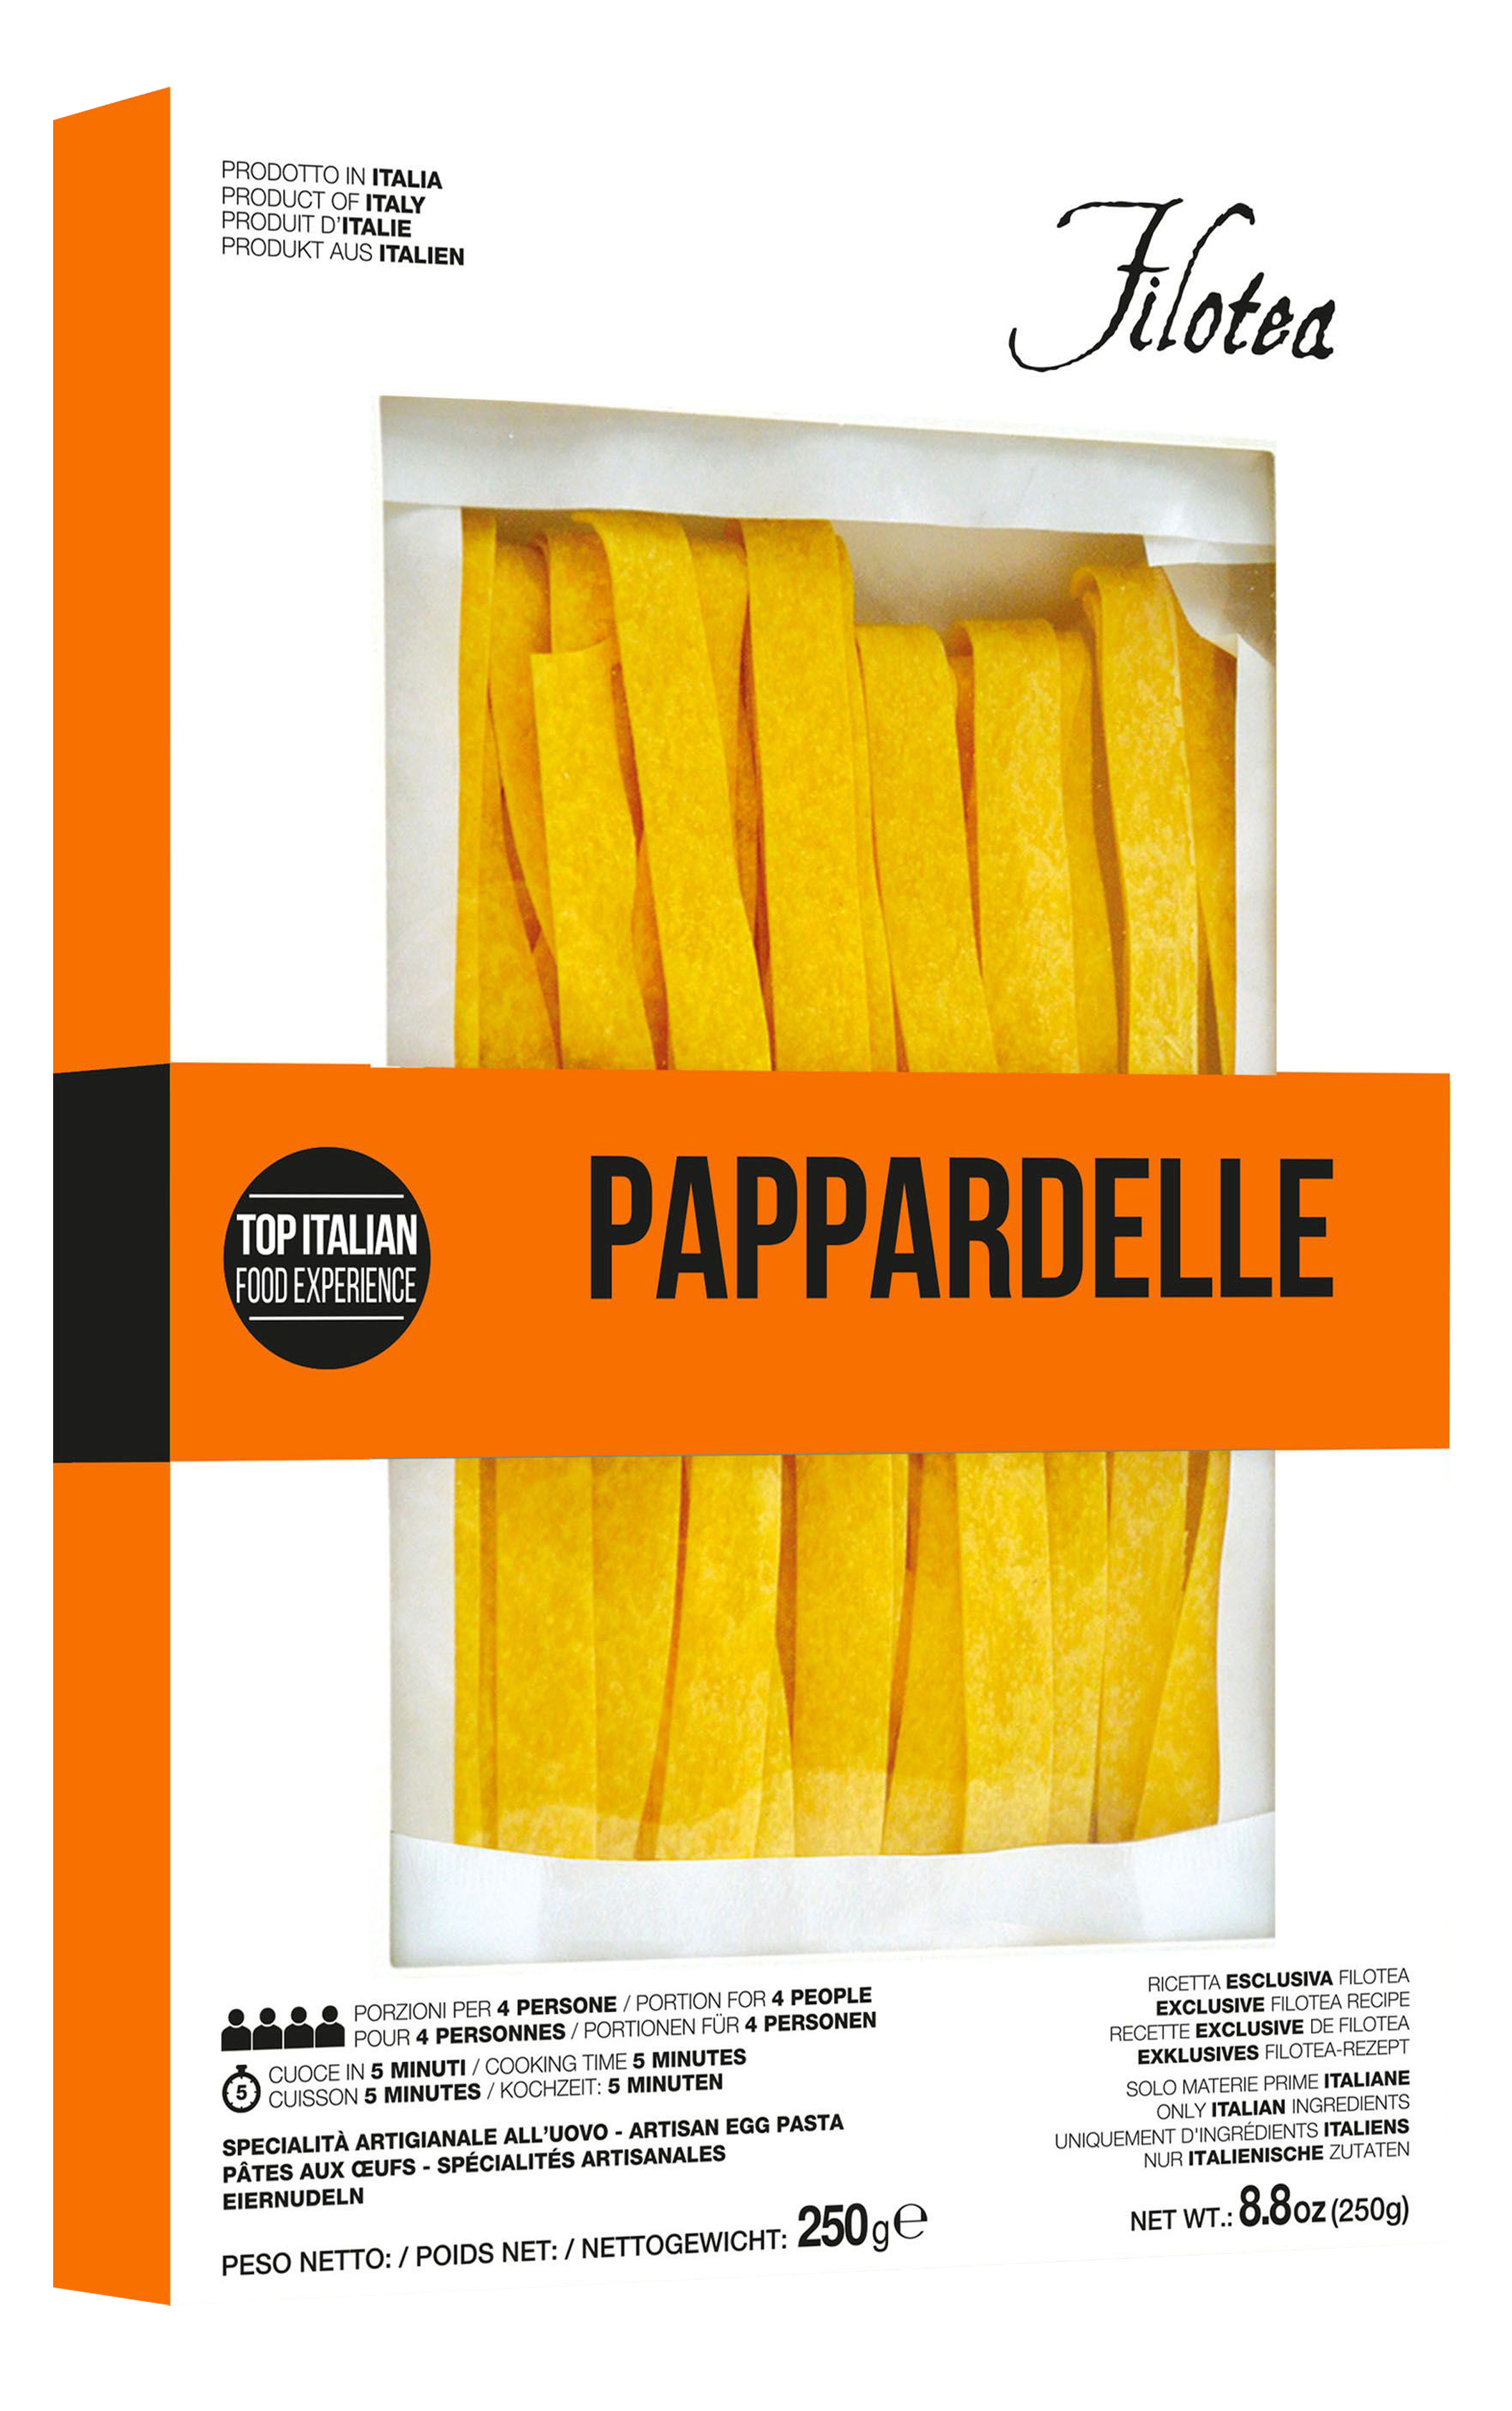  Pappardelle